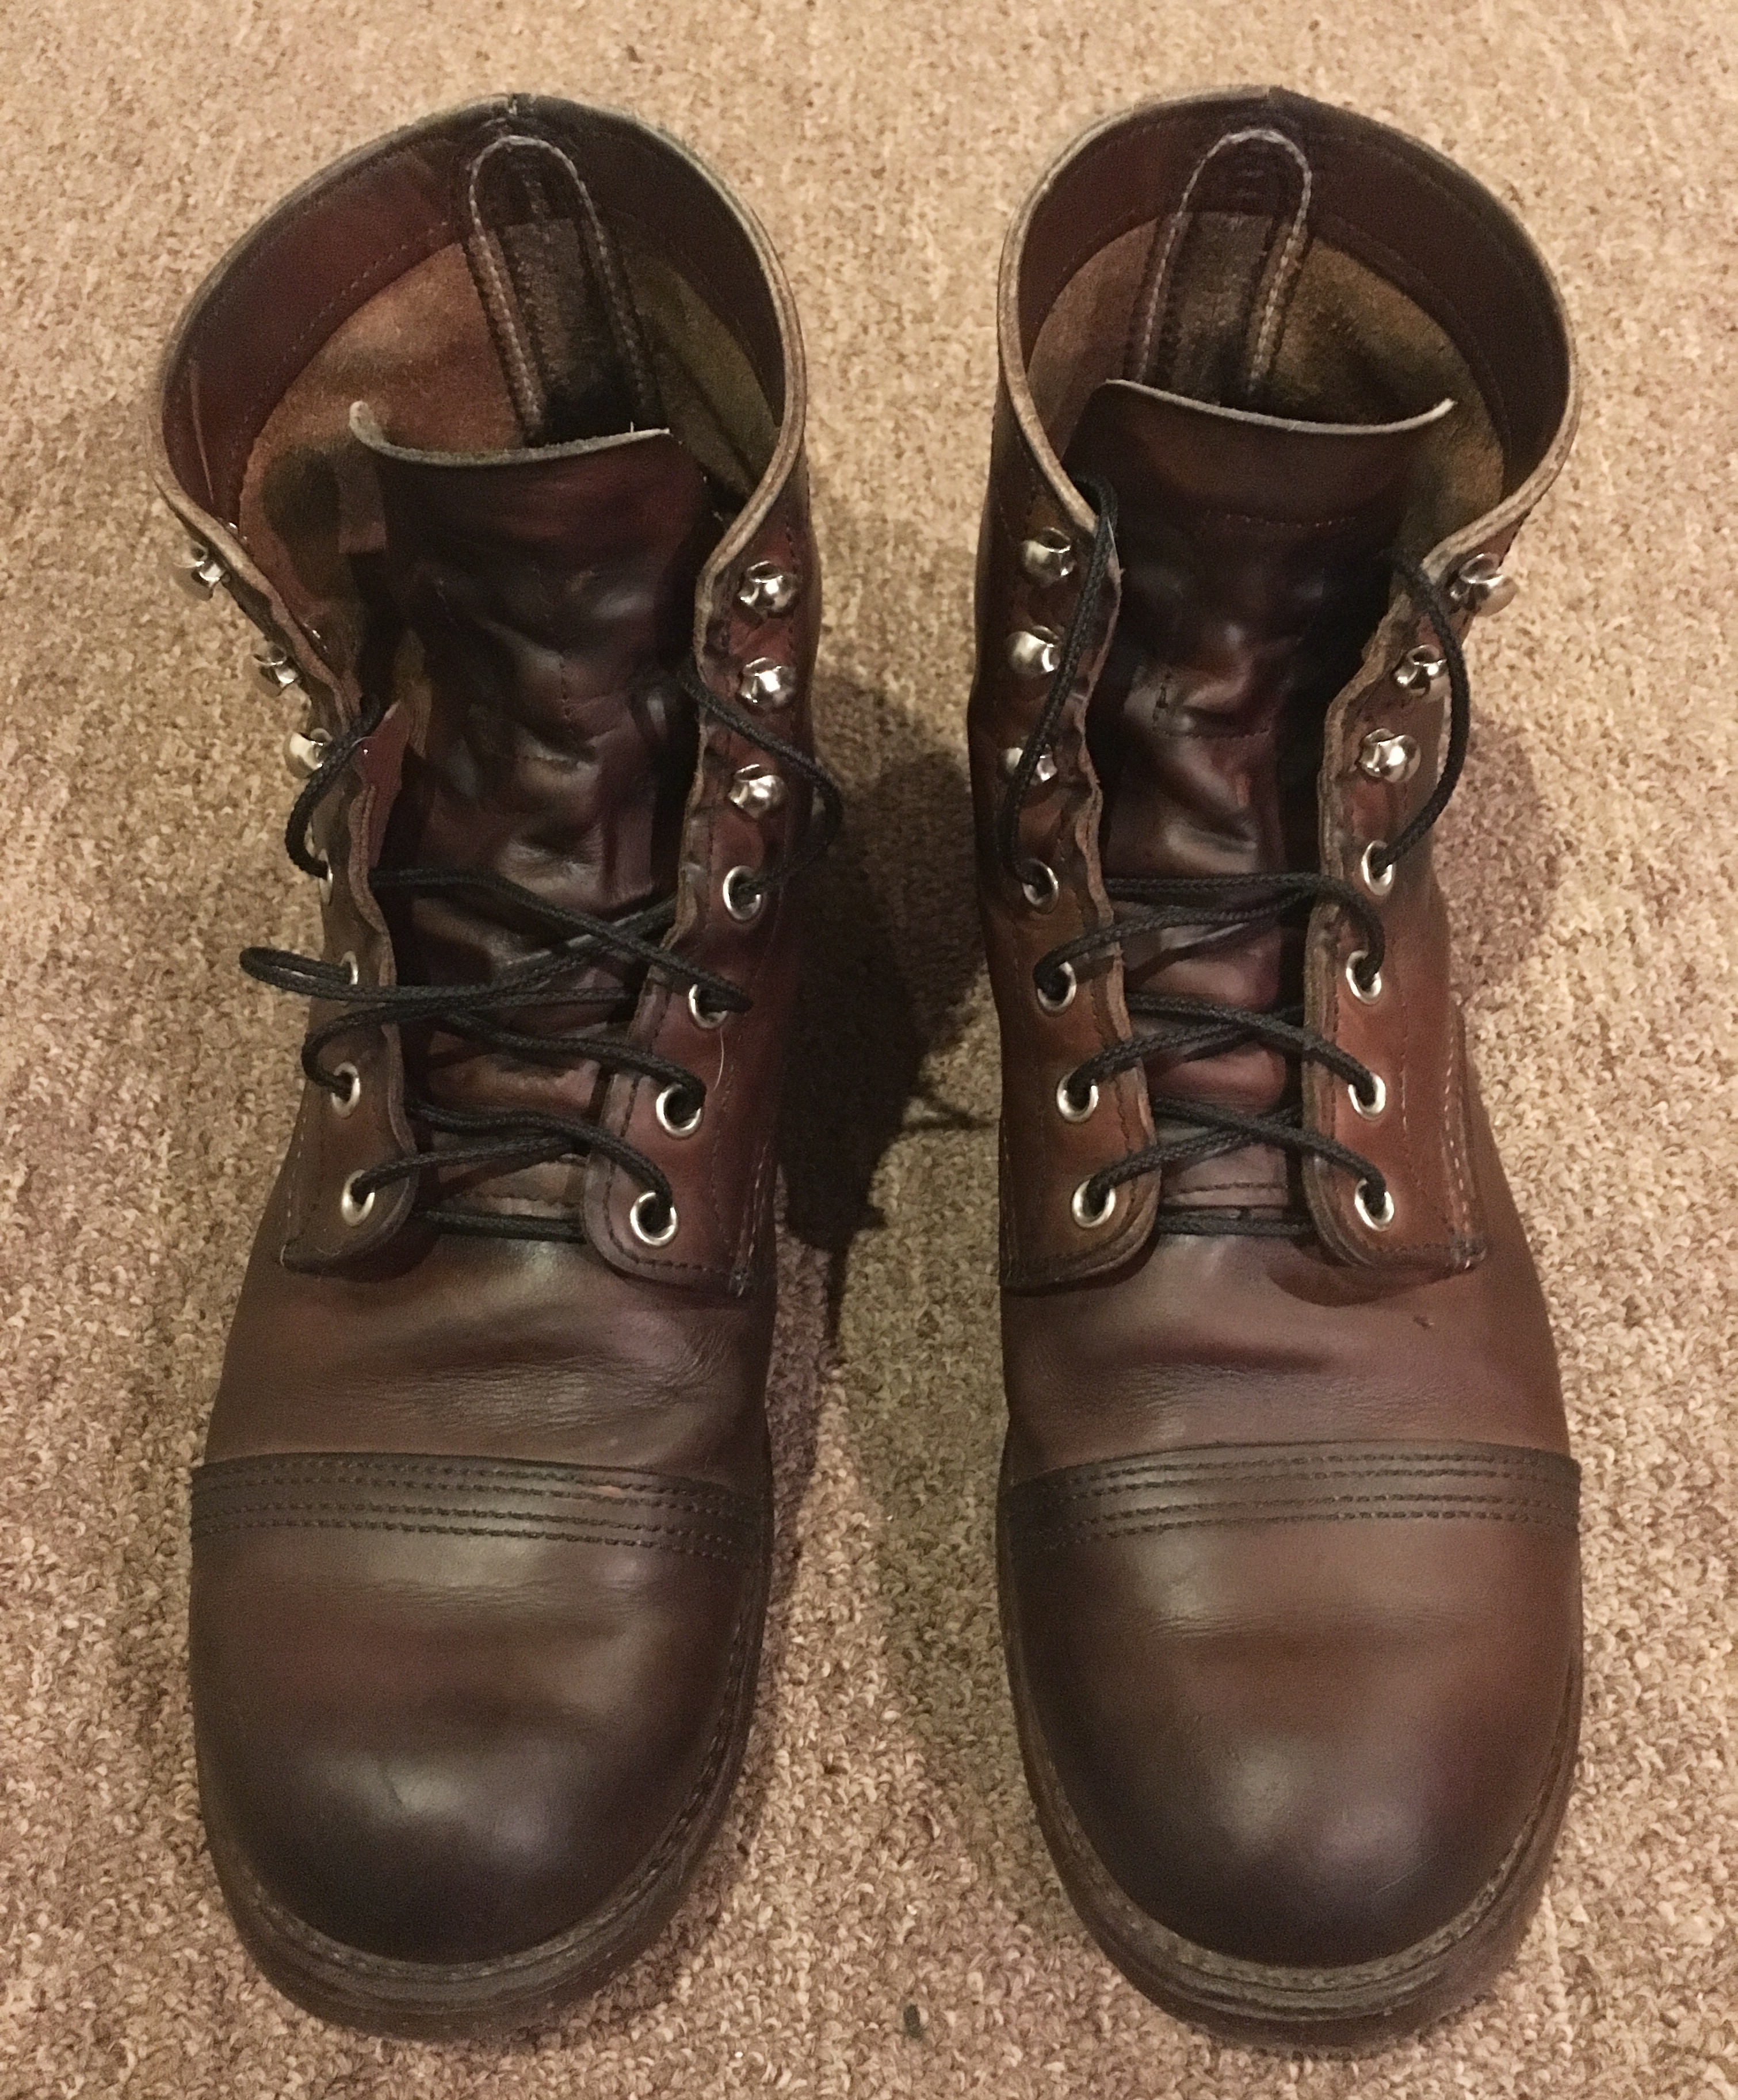 Red Wing Iron Ranger Boots - what's the dilly yo? | Page 72 | Styleforum